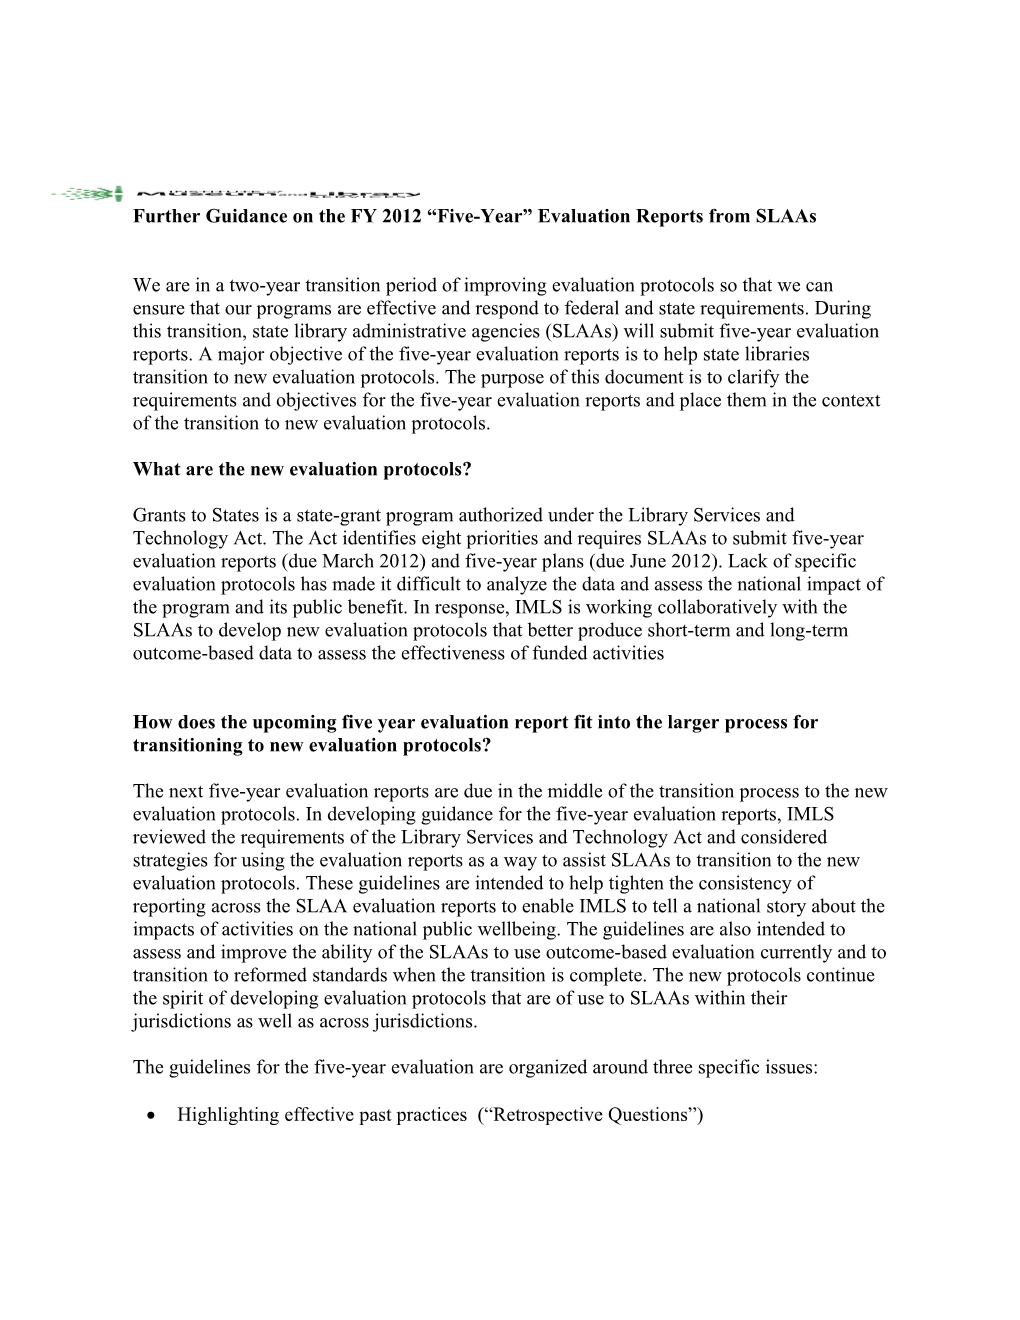 Further Guidance on the FY 2012 Five-Year Evaluation Reports from Slaas